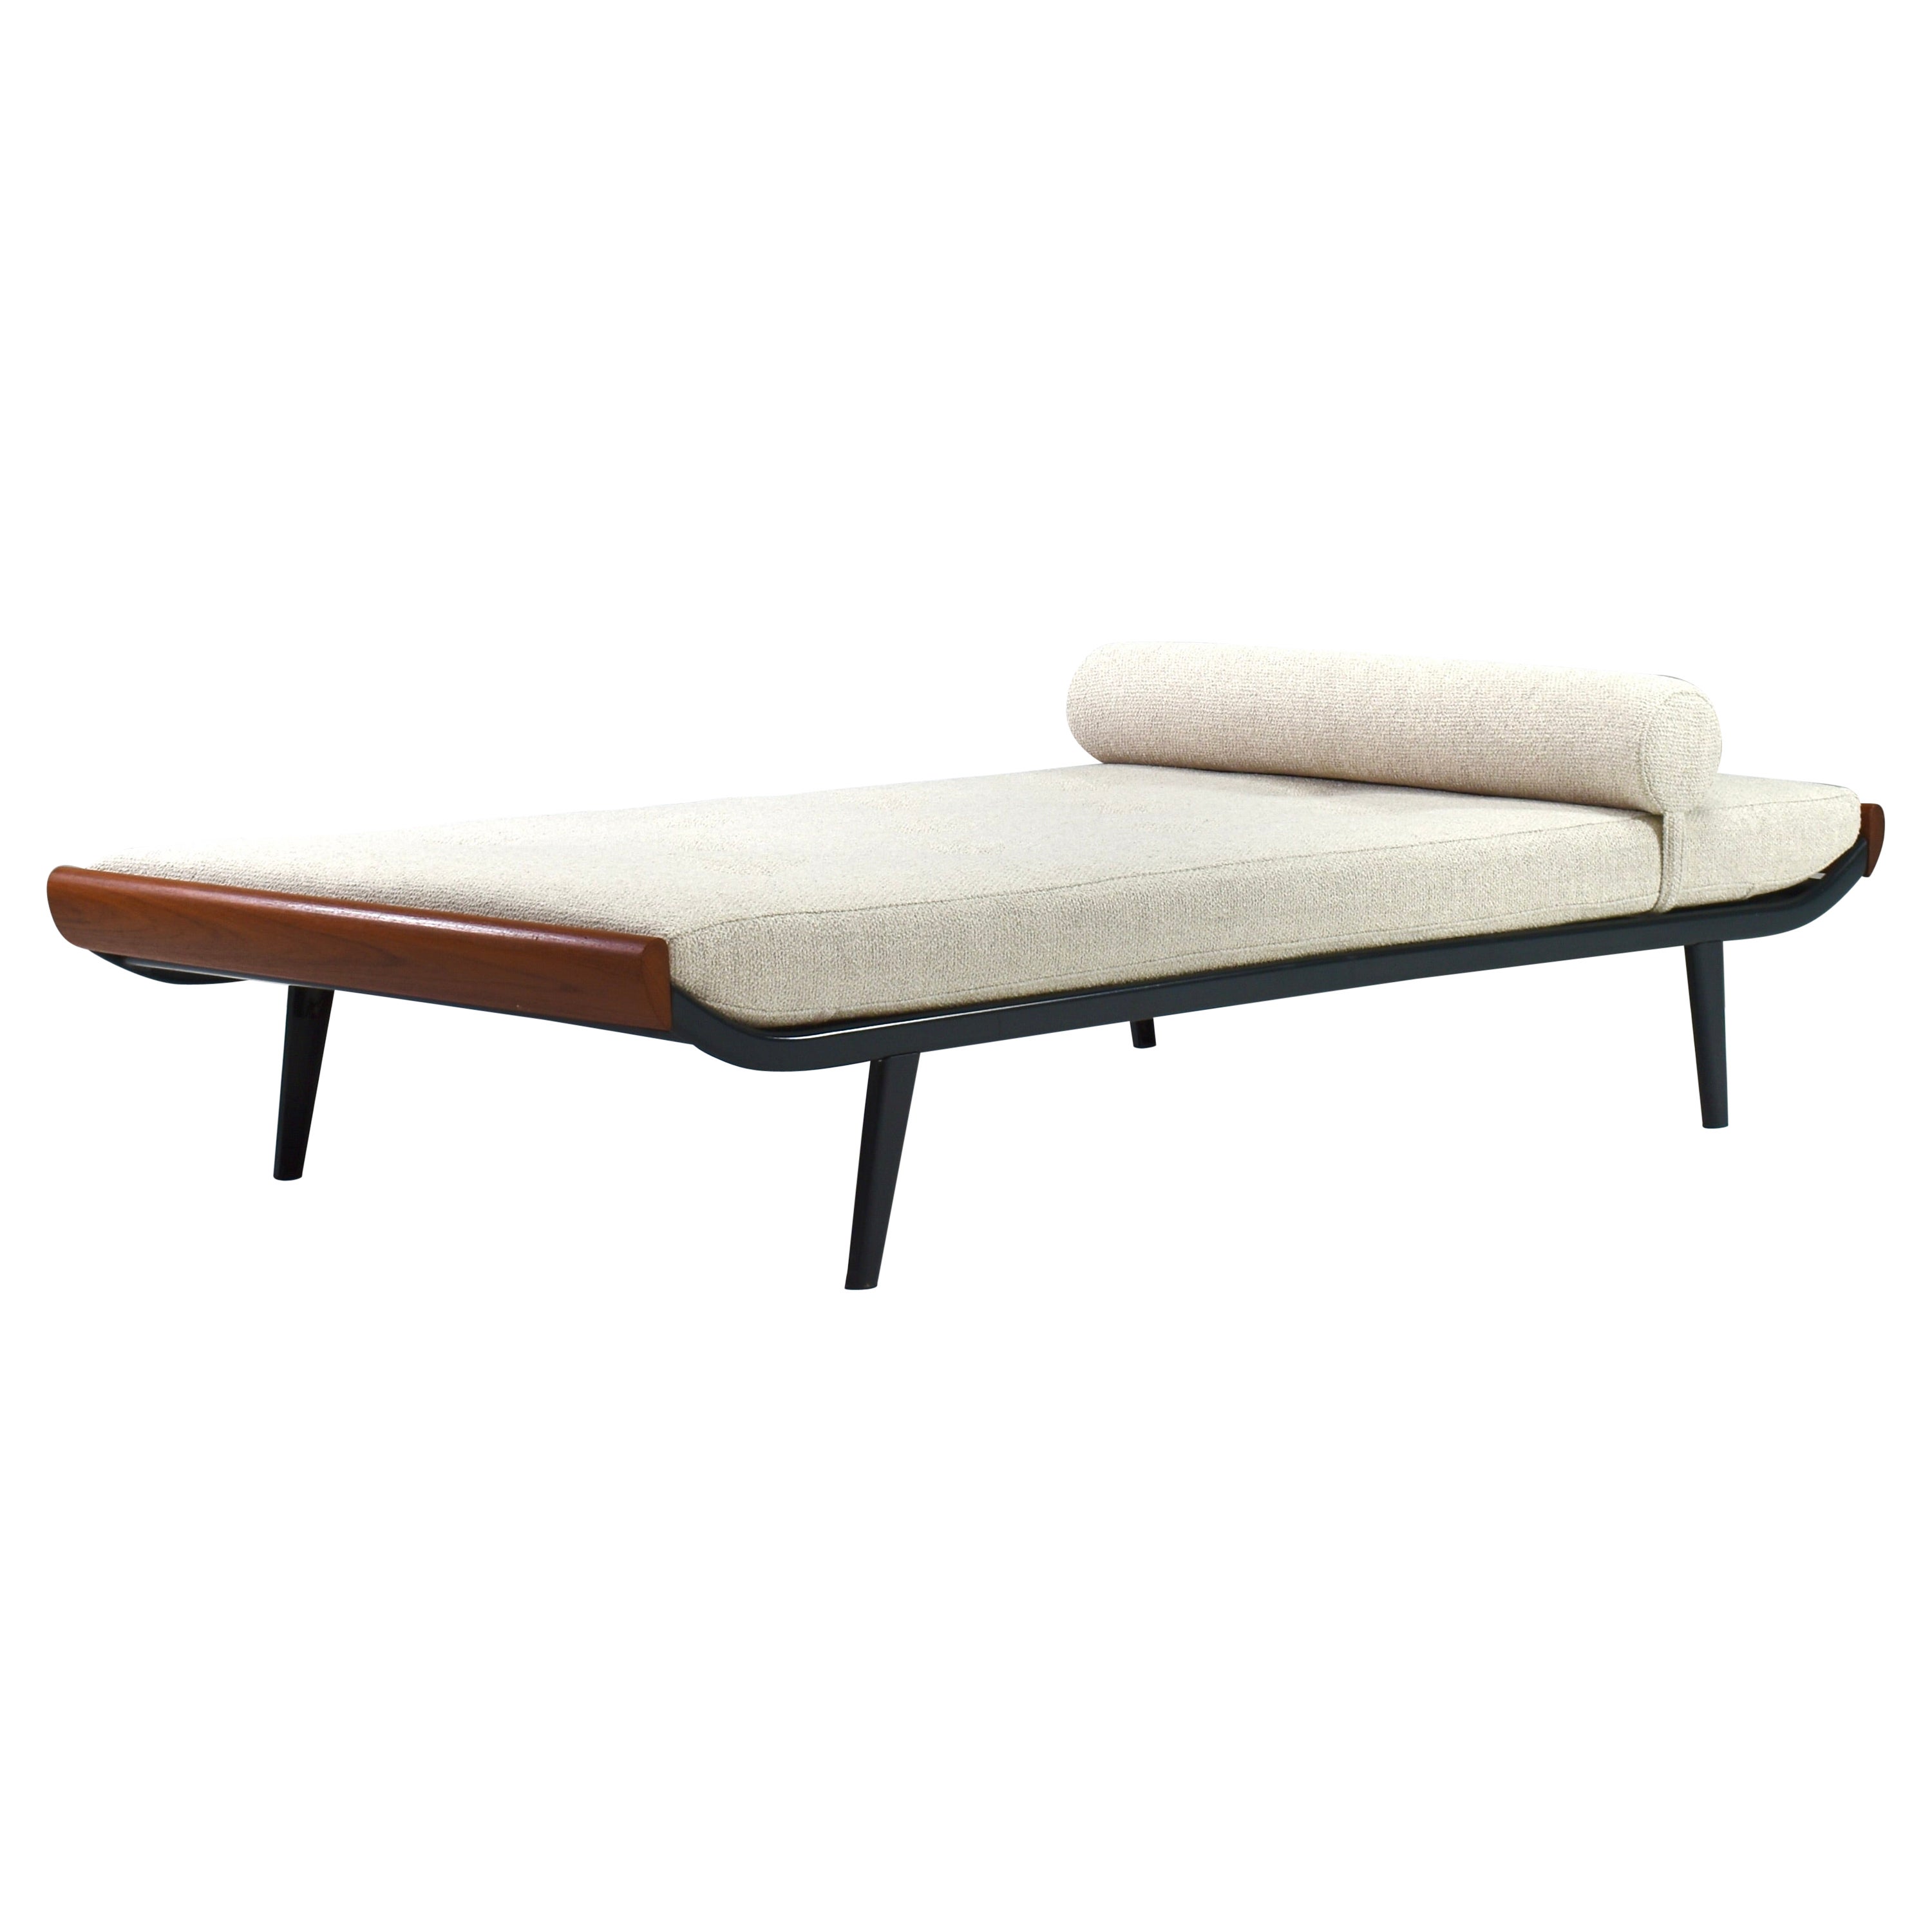 Cleopatra Daybed Designed by Cordemeyer for Auping *New Upholstery* Holland 1954